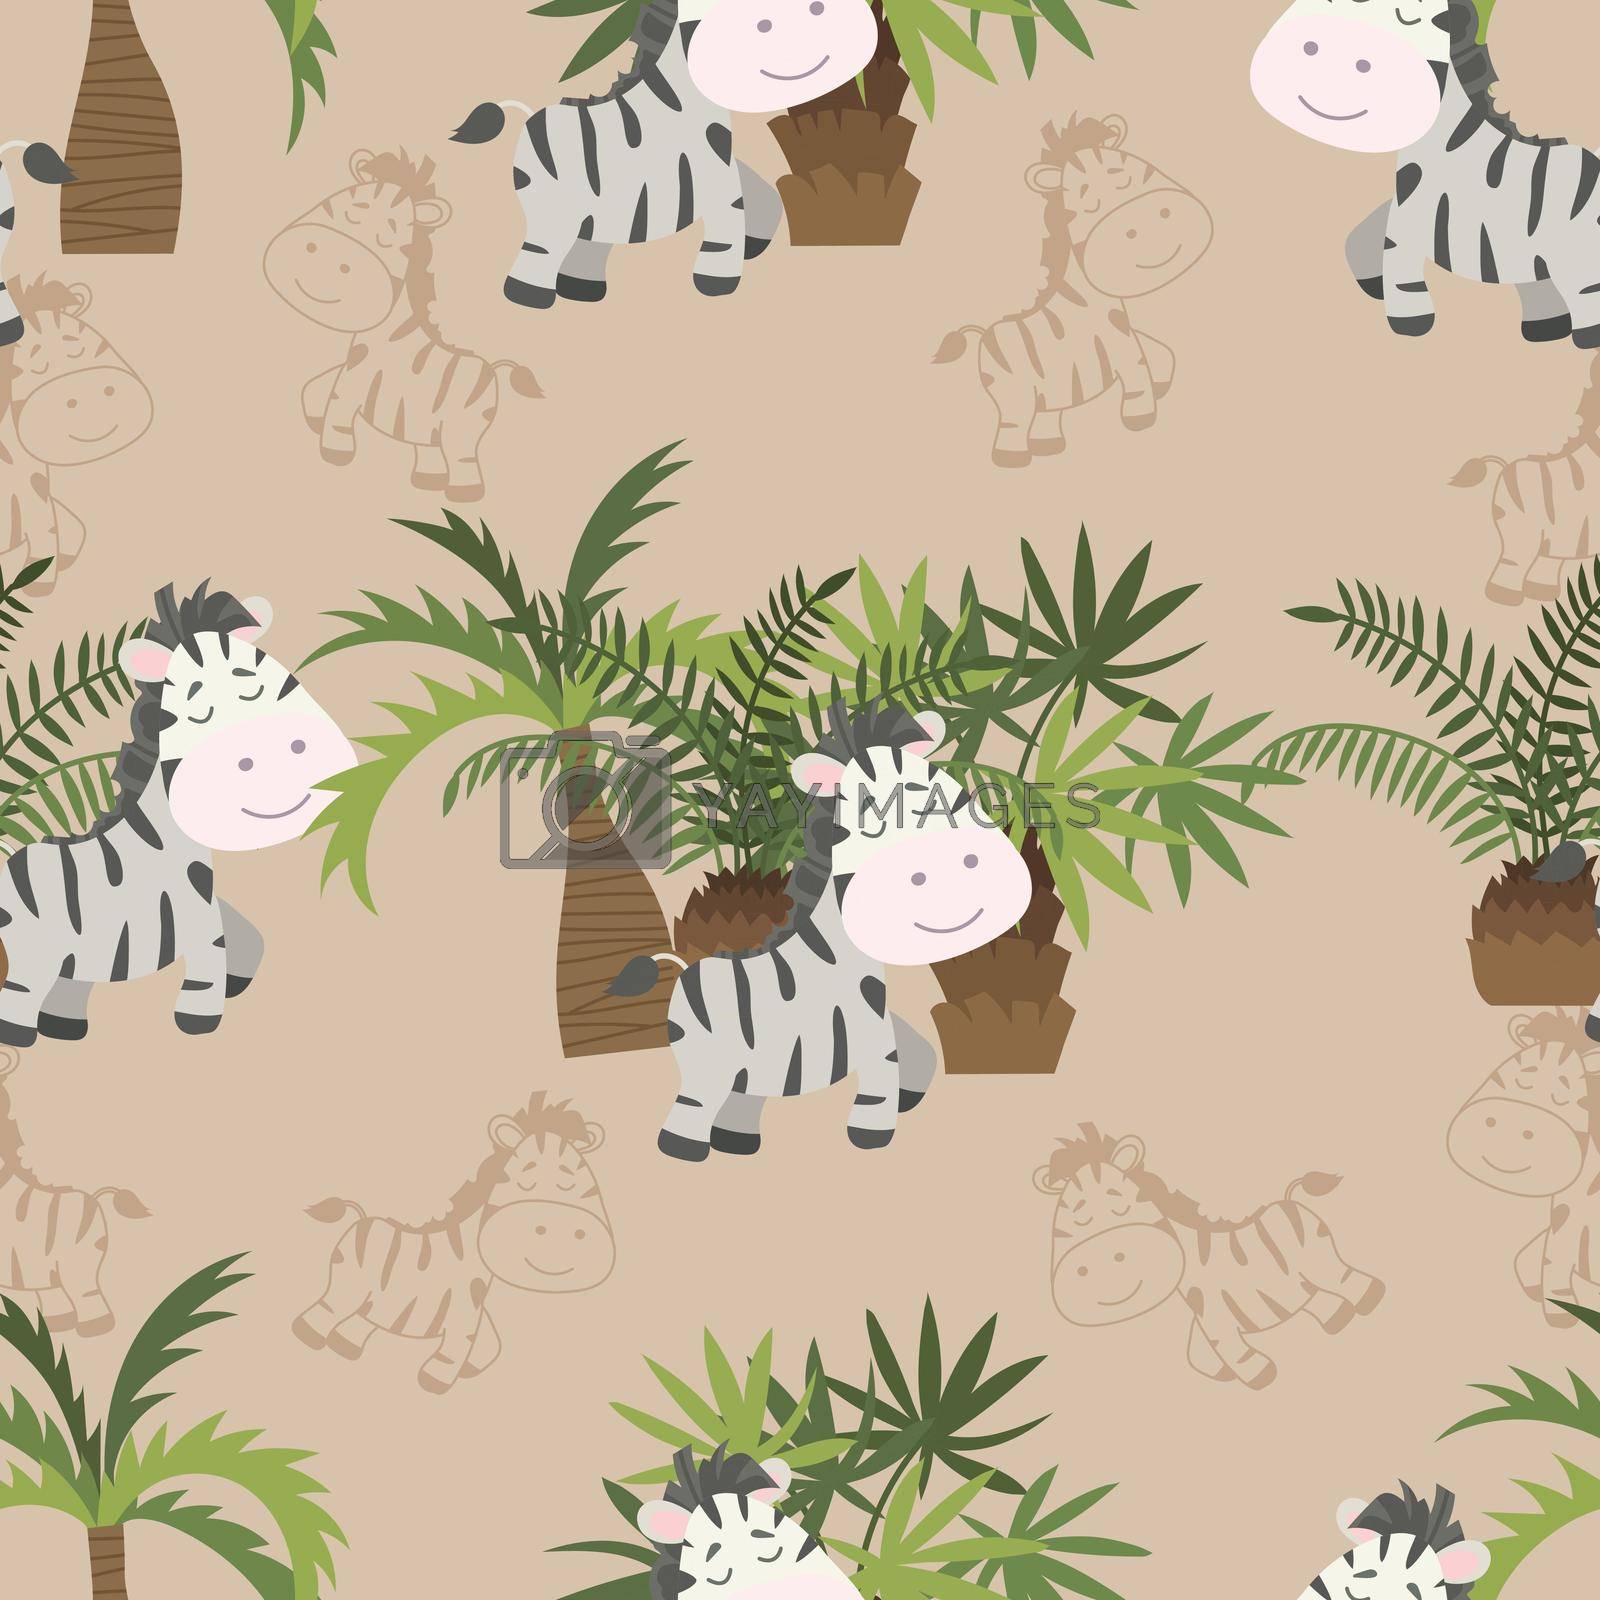 Royalty free image of Seamless doodle zebra and palm cartoon pattern by valueinvestor